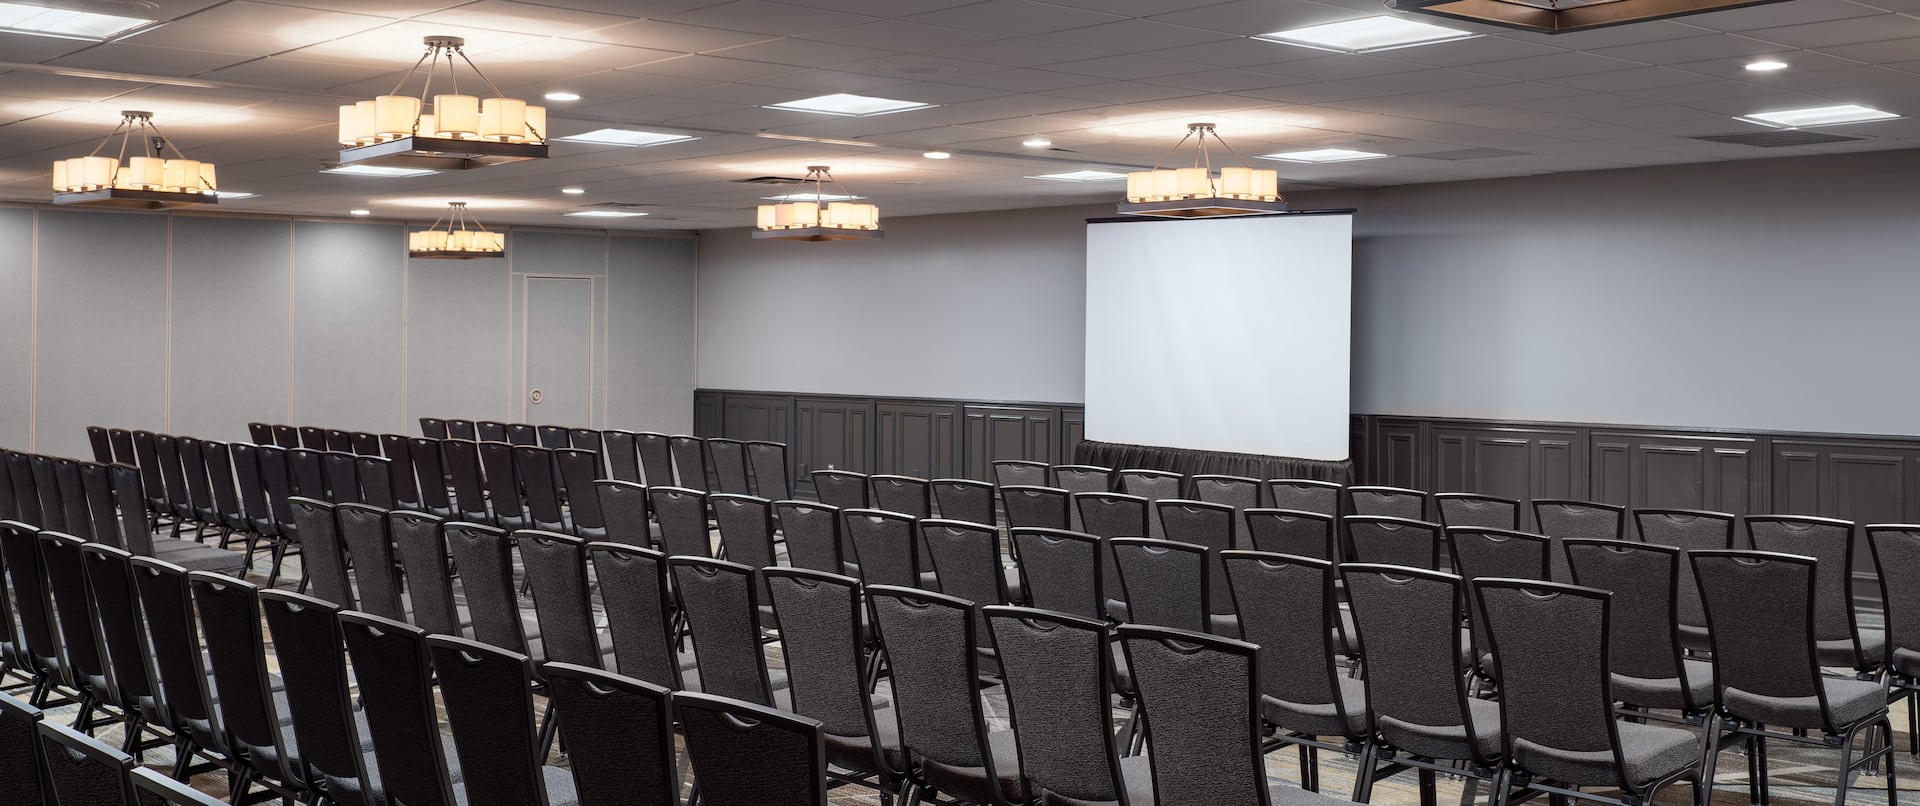 Ballroom Theater Setup with Projector Screen